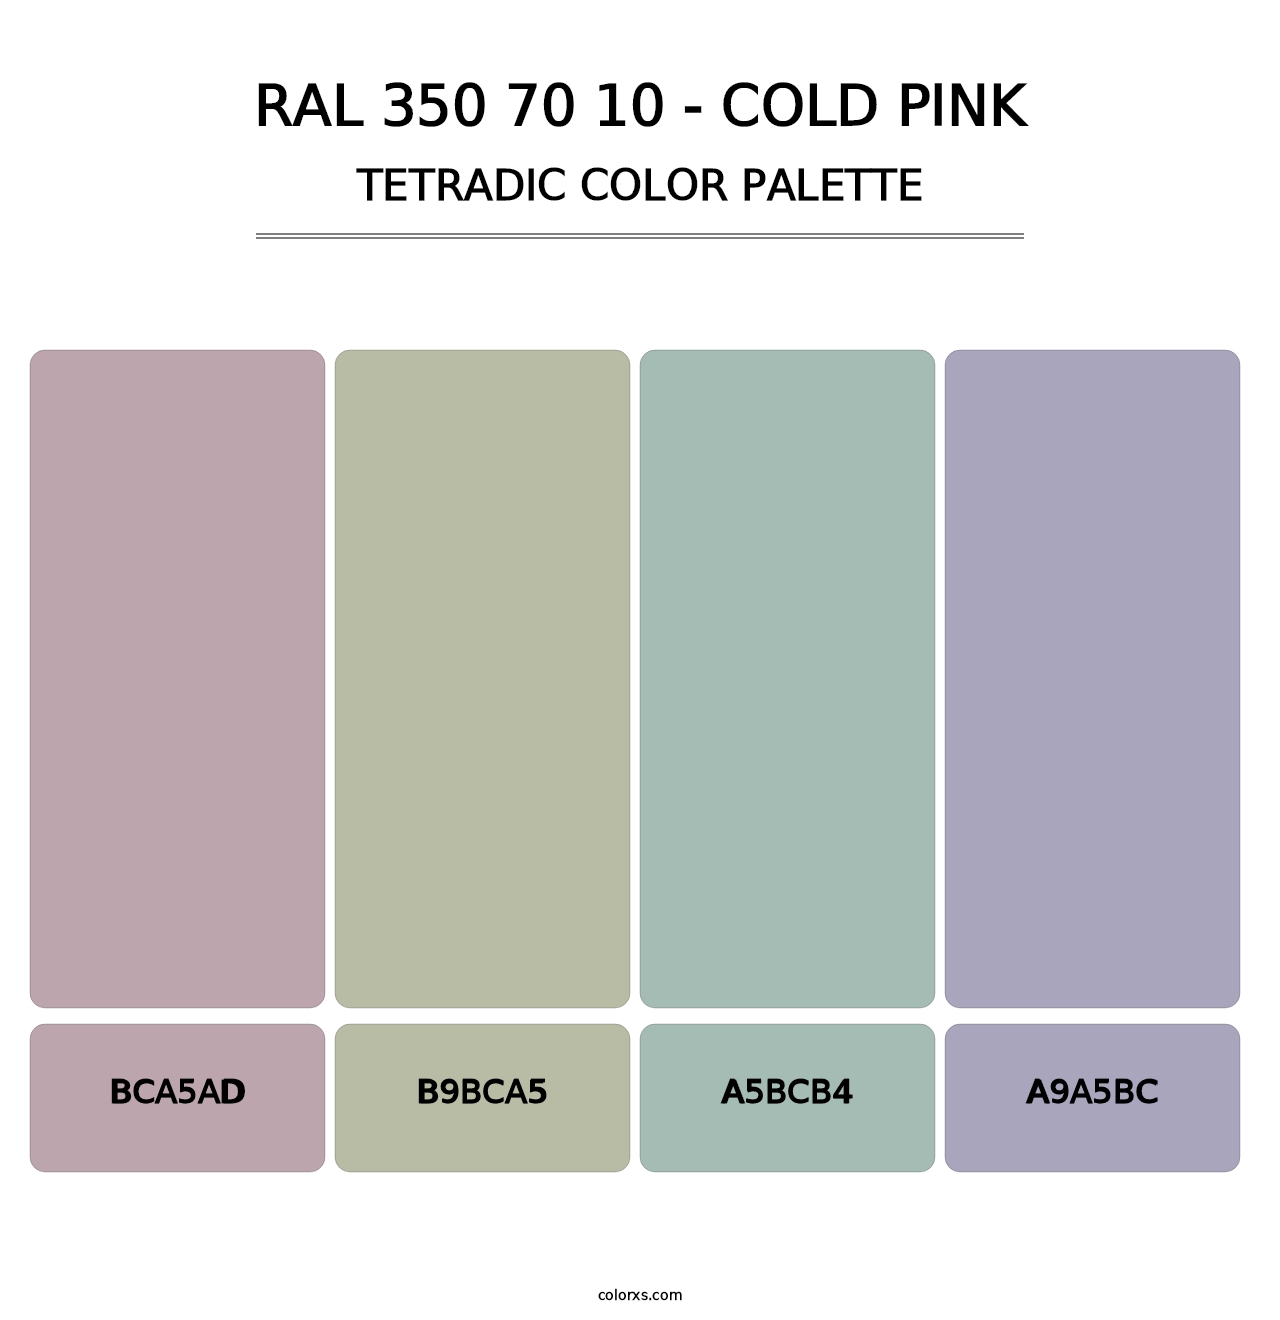 RAL 350 70 10 - Cold Pink - Tetradic Color Palette